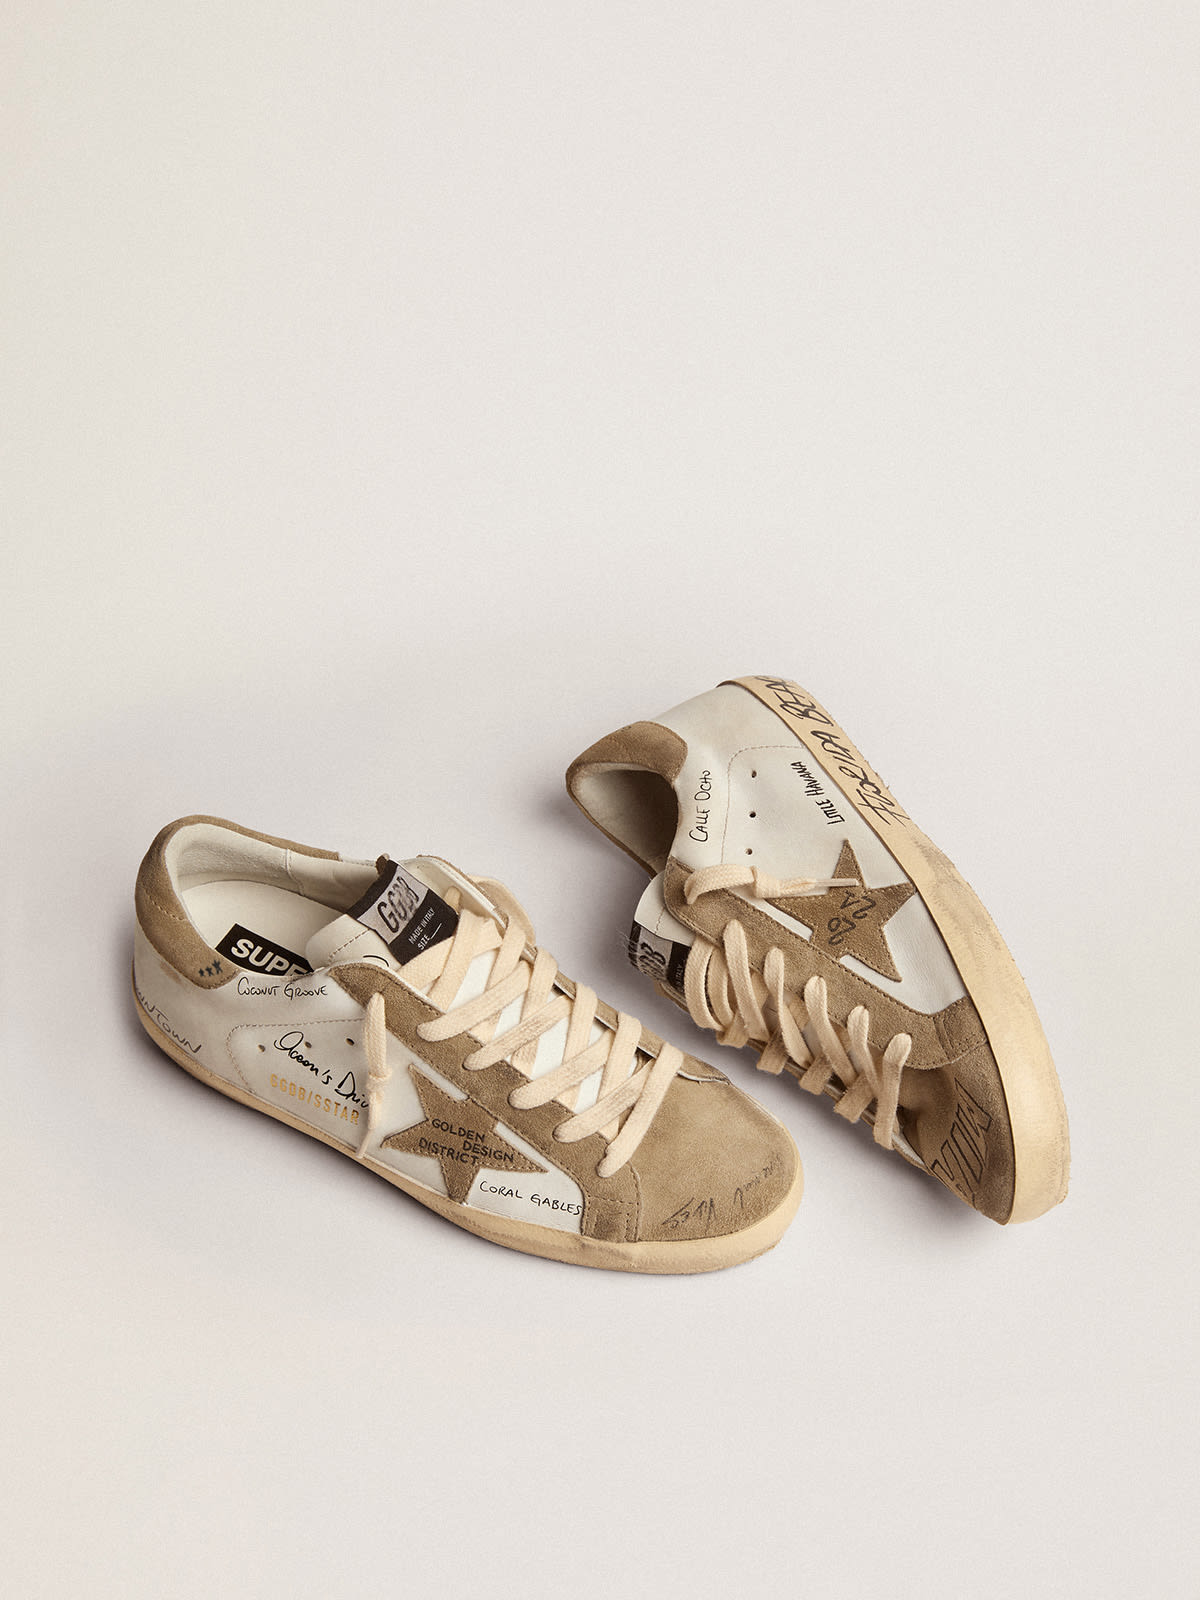 Golden Goose - Super-Star sneakers in white leather with dove-gray suede inserts and all-over black lettering in 